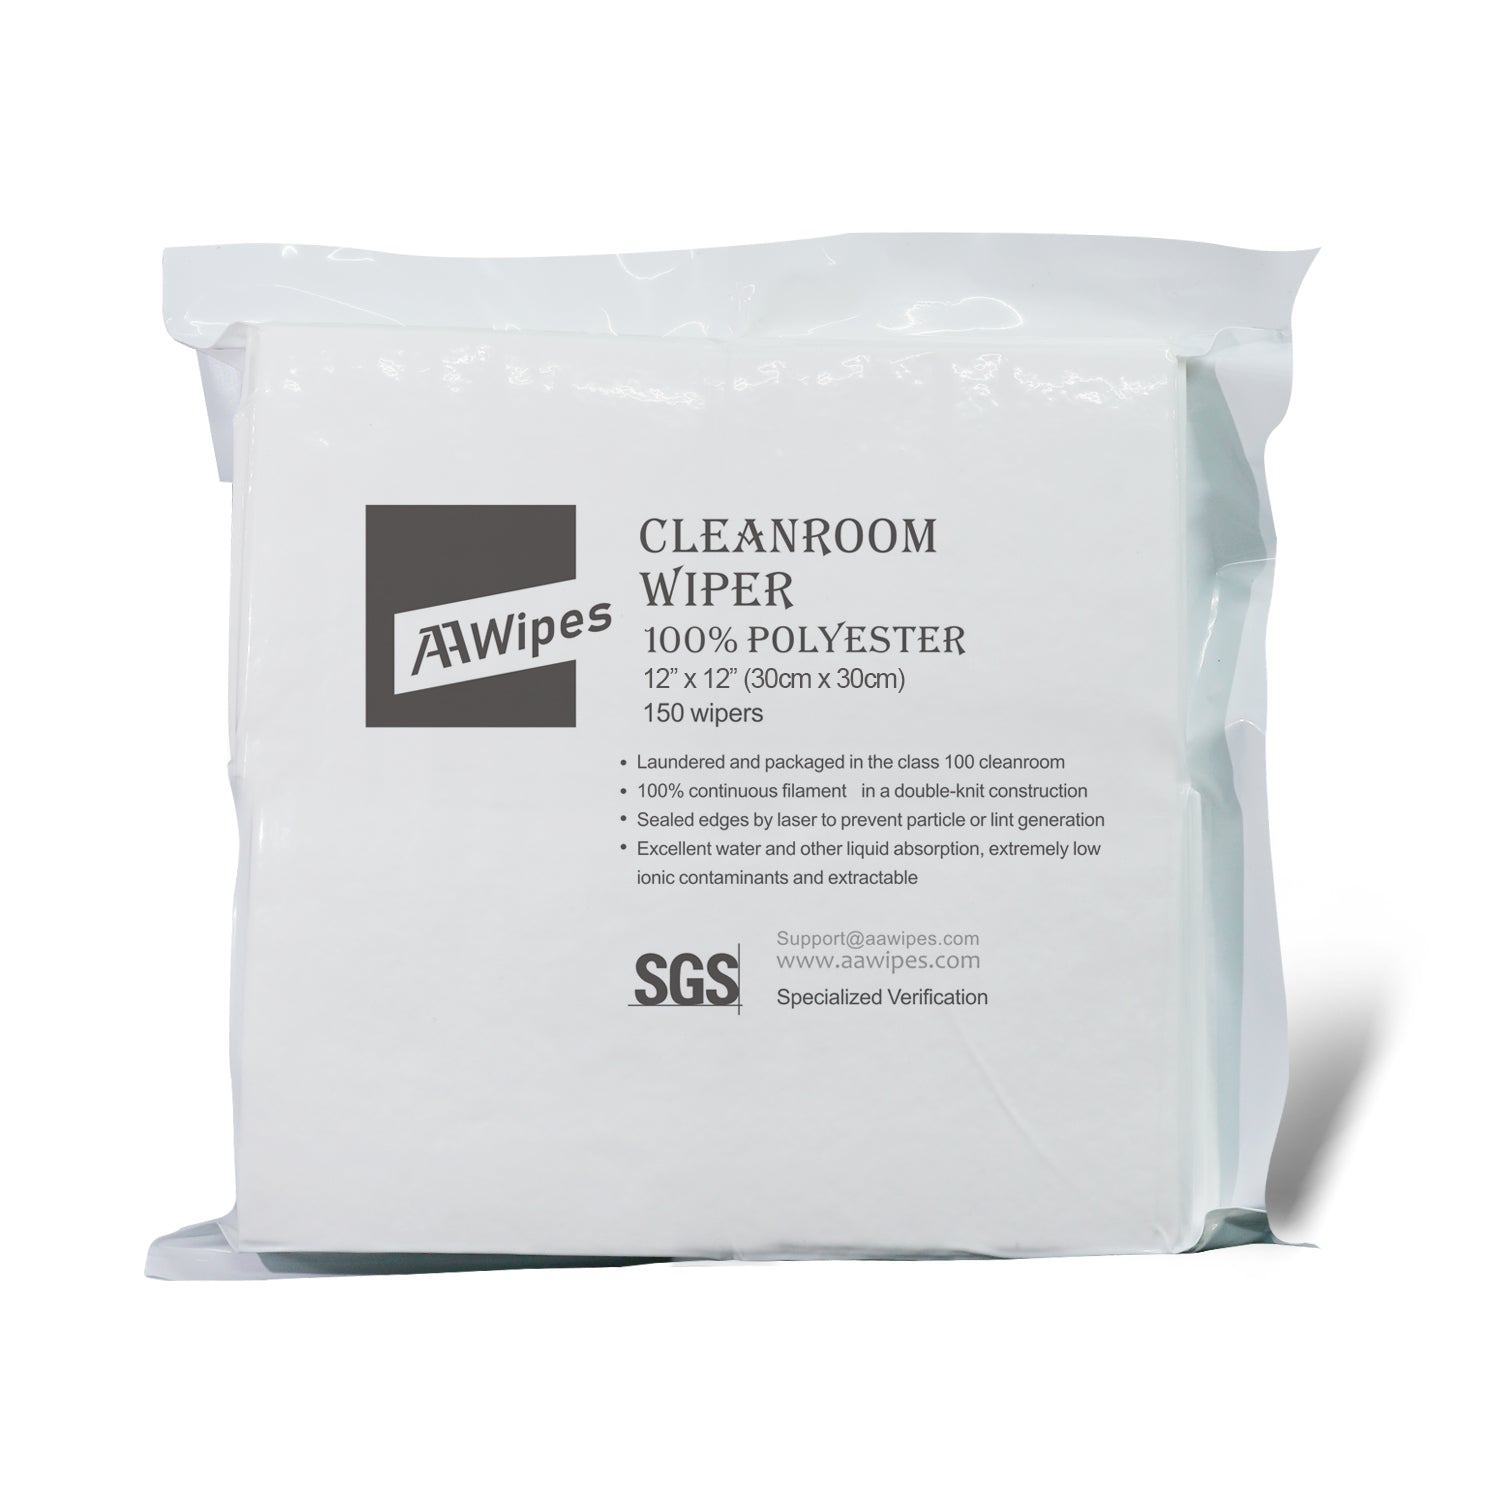 Lab Biotech Lint-free Cleanroom Double Knit 100% Polyester Wipers 12"x12" for Pharmaceutical Workshop Cleaning (Starting at 1 Box with 1,200 Wipes per 8 Bags) (No. CP14012)